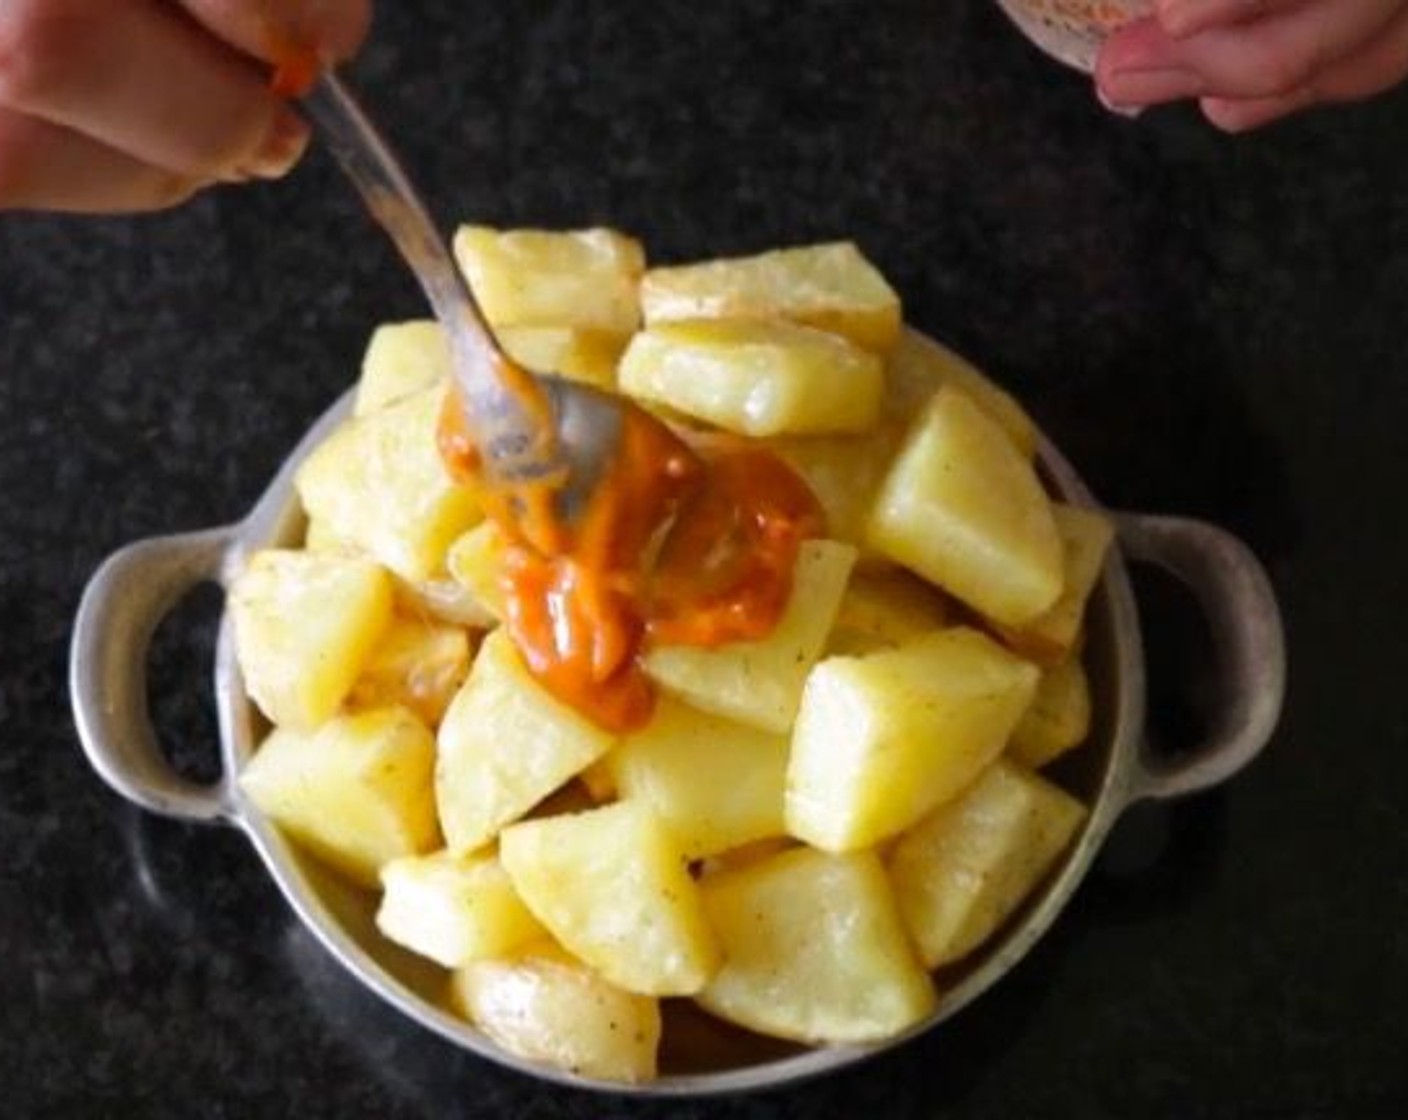 step 15 Once the potatoes are cooked through, remove them from the oven and transfer them to a shallow serving bowl. Add Salsa Brava (2 Tbsp) to the top of the potatoes.